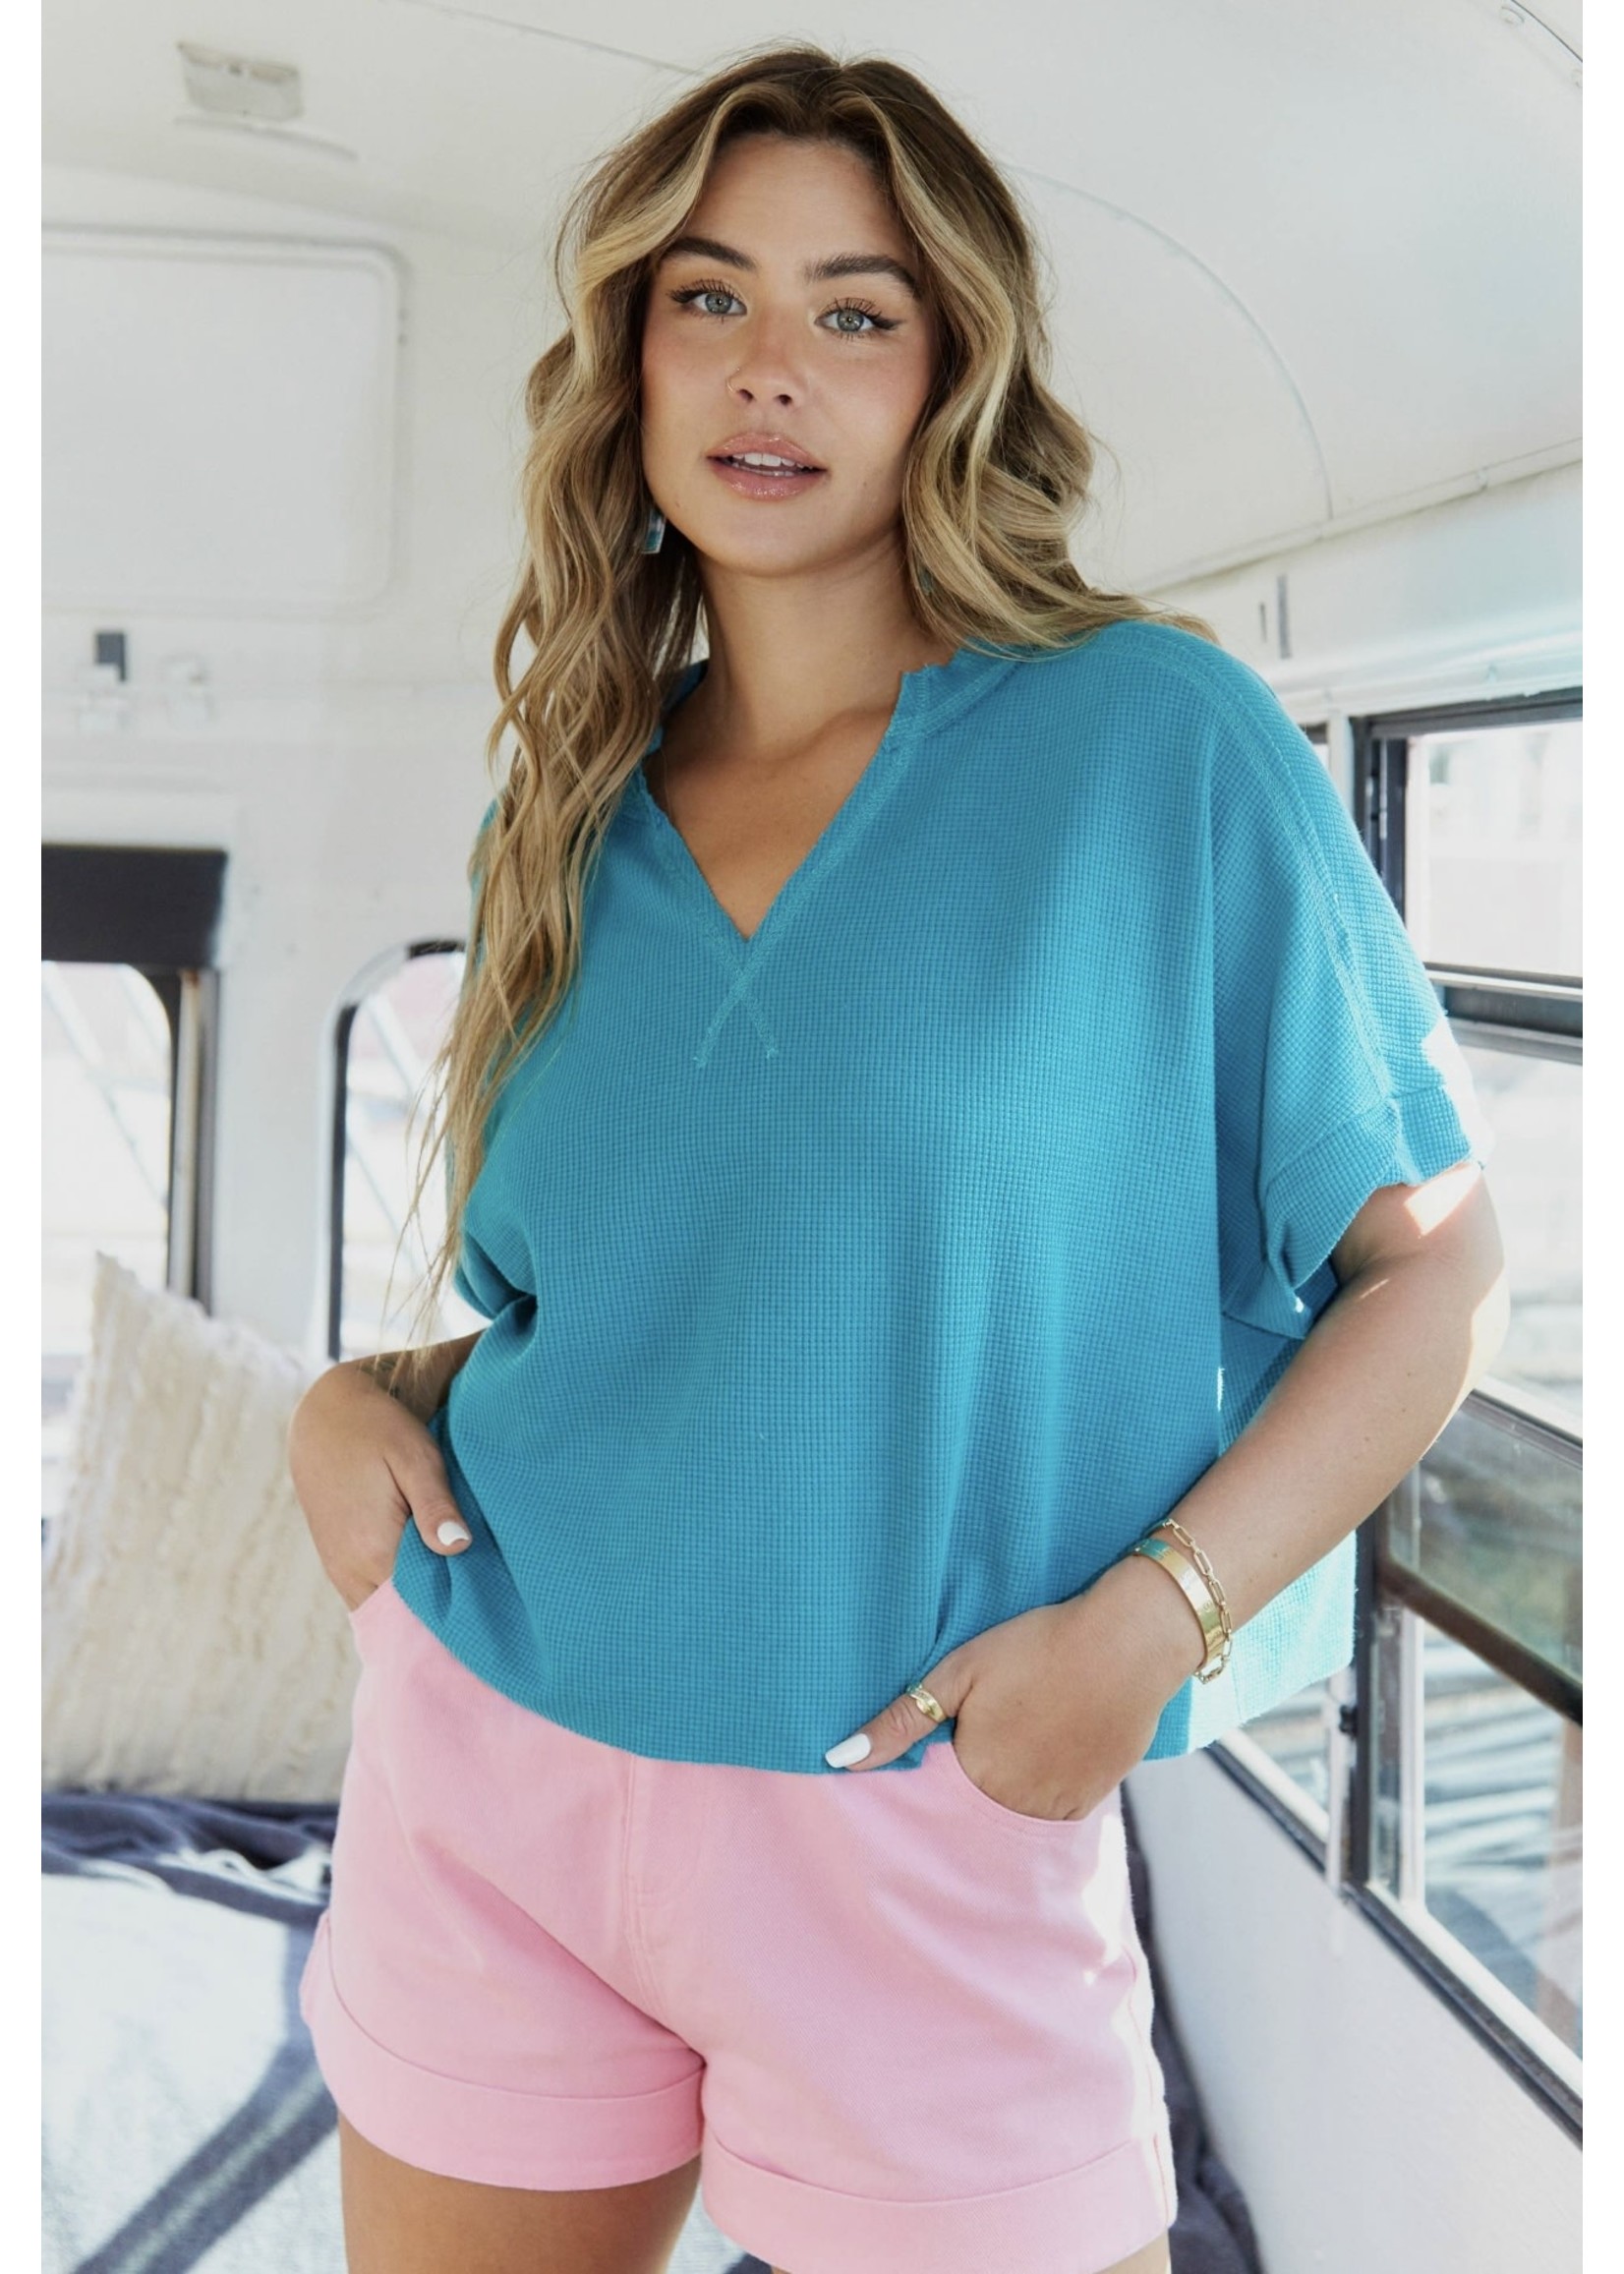 Peach Love California Washed Teal V-Neck Top